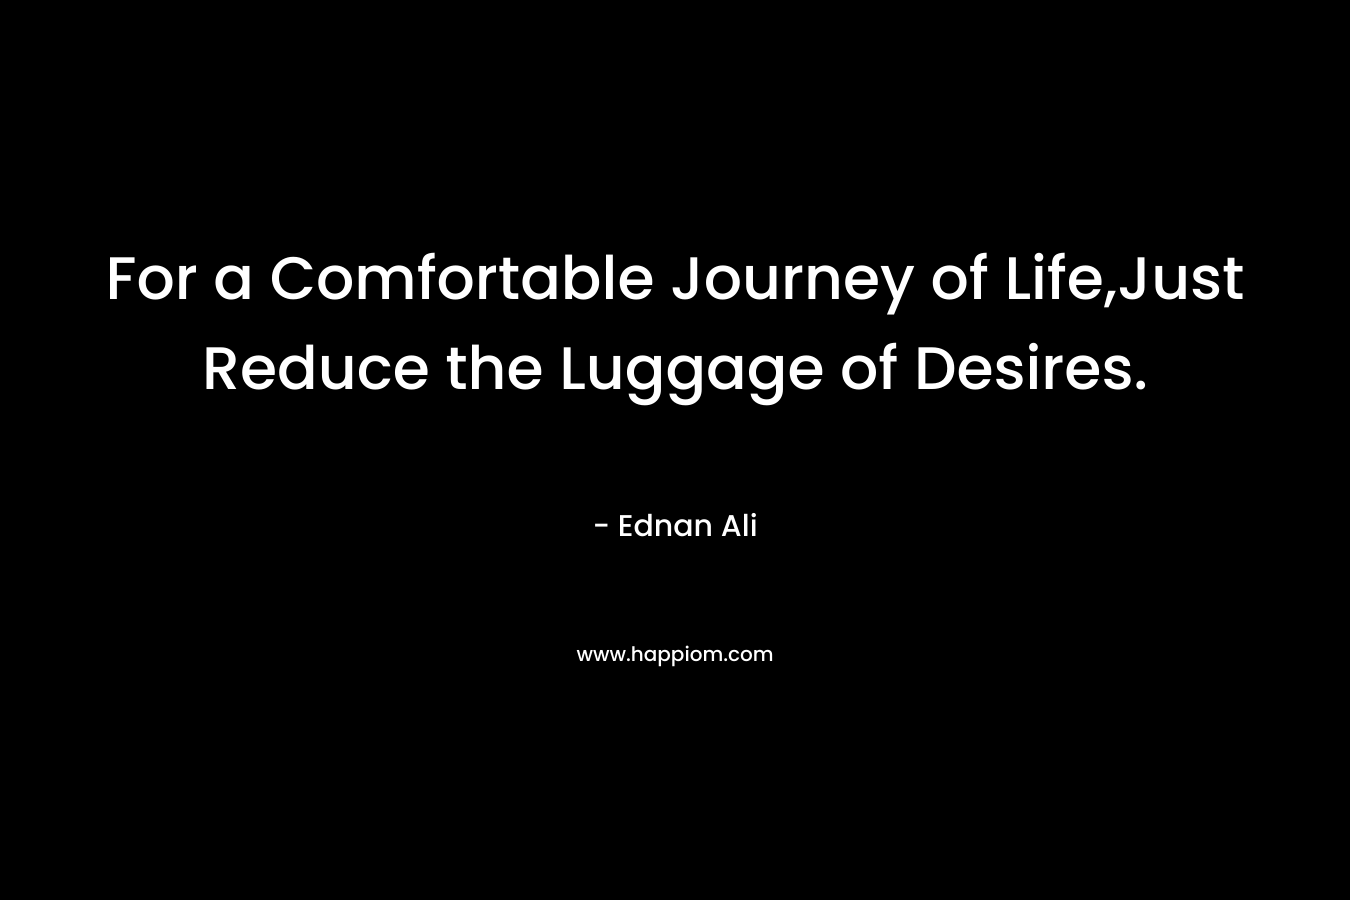 For a Comfortable Journey of Life,Just Reduce the Luggage of Desires.